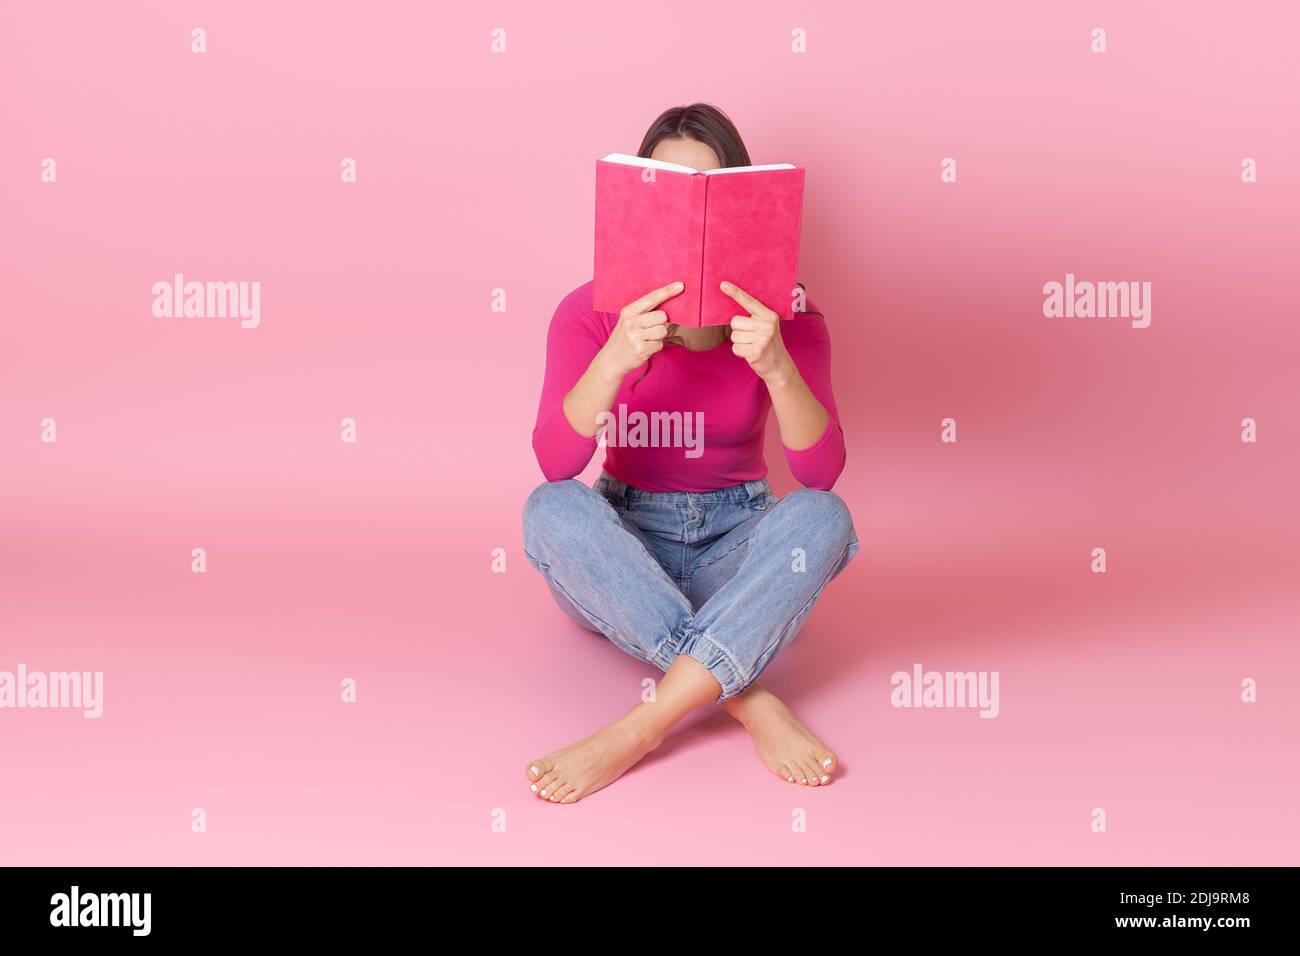 portrait of a young woman sitting cross-legged on the floor and hiding her face behind an open book and reading a book in her hands Stock Photo